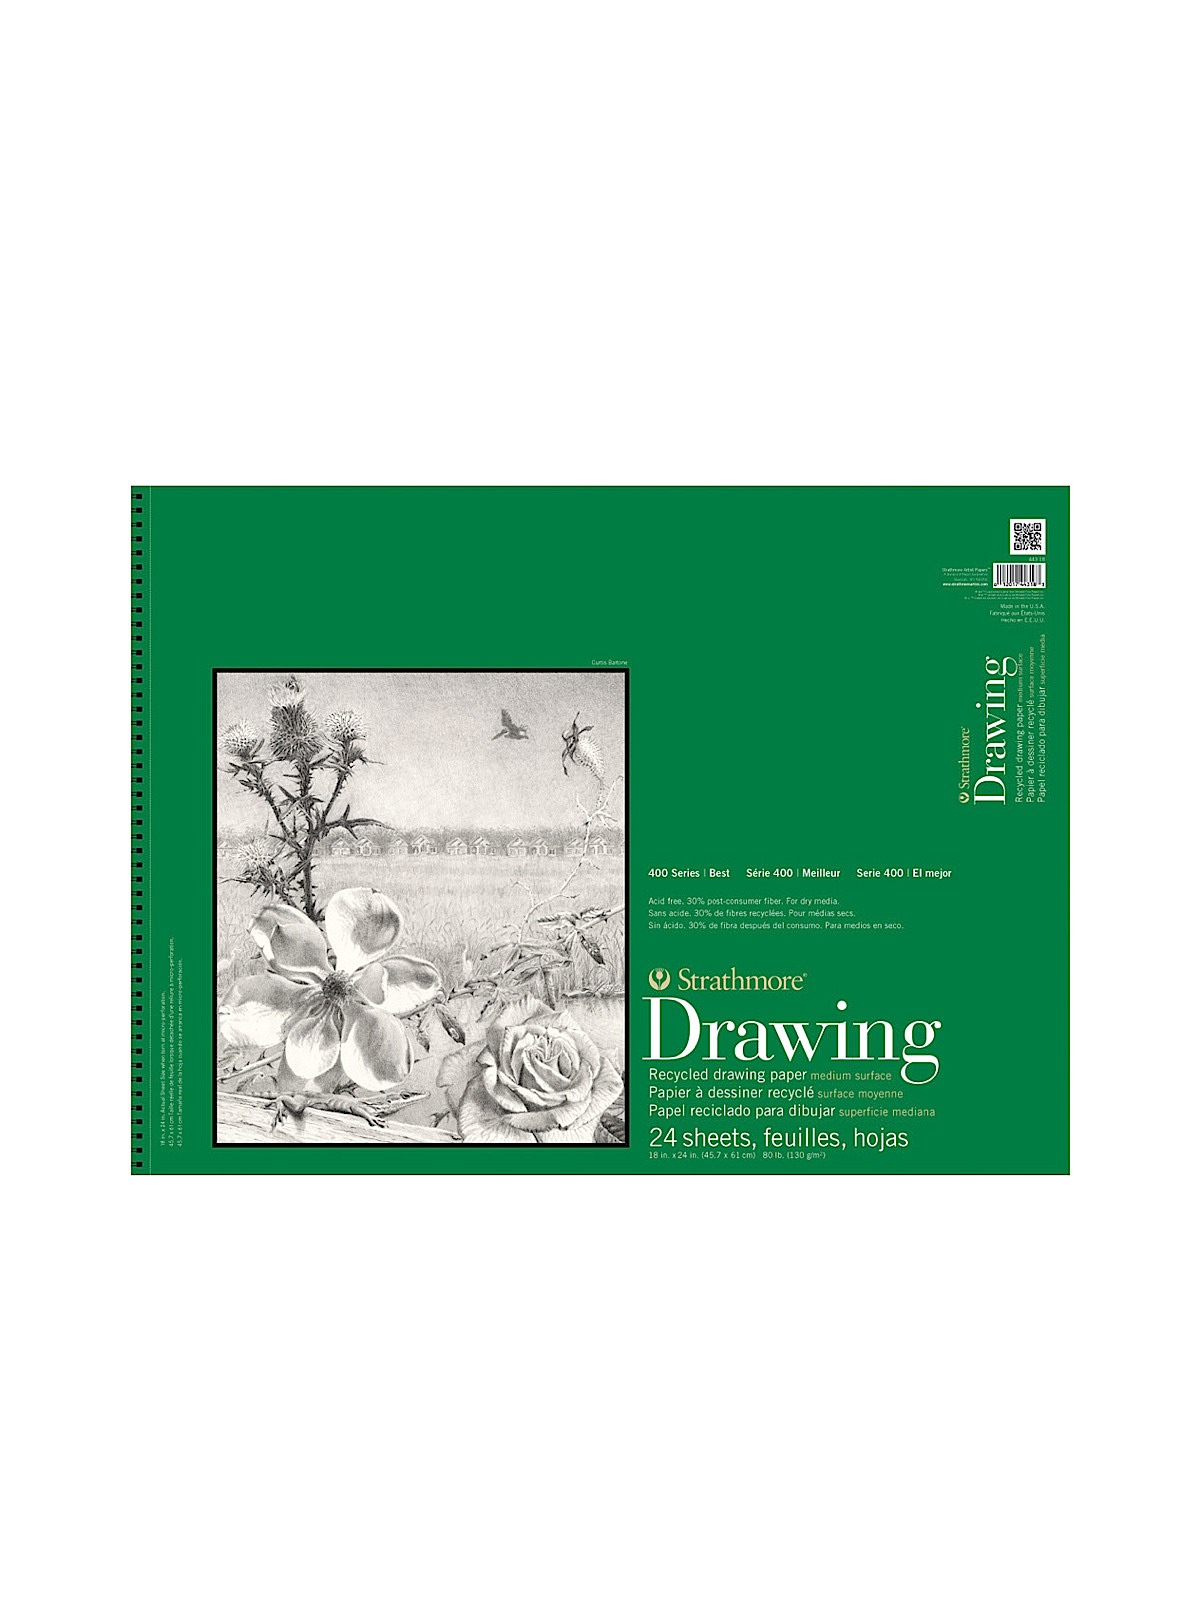 Series 400 Premium Recycled Drawing Pads 14 In. X 17 In.